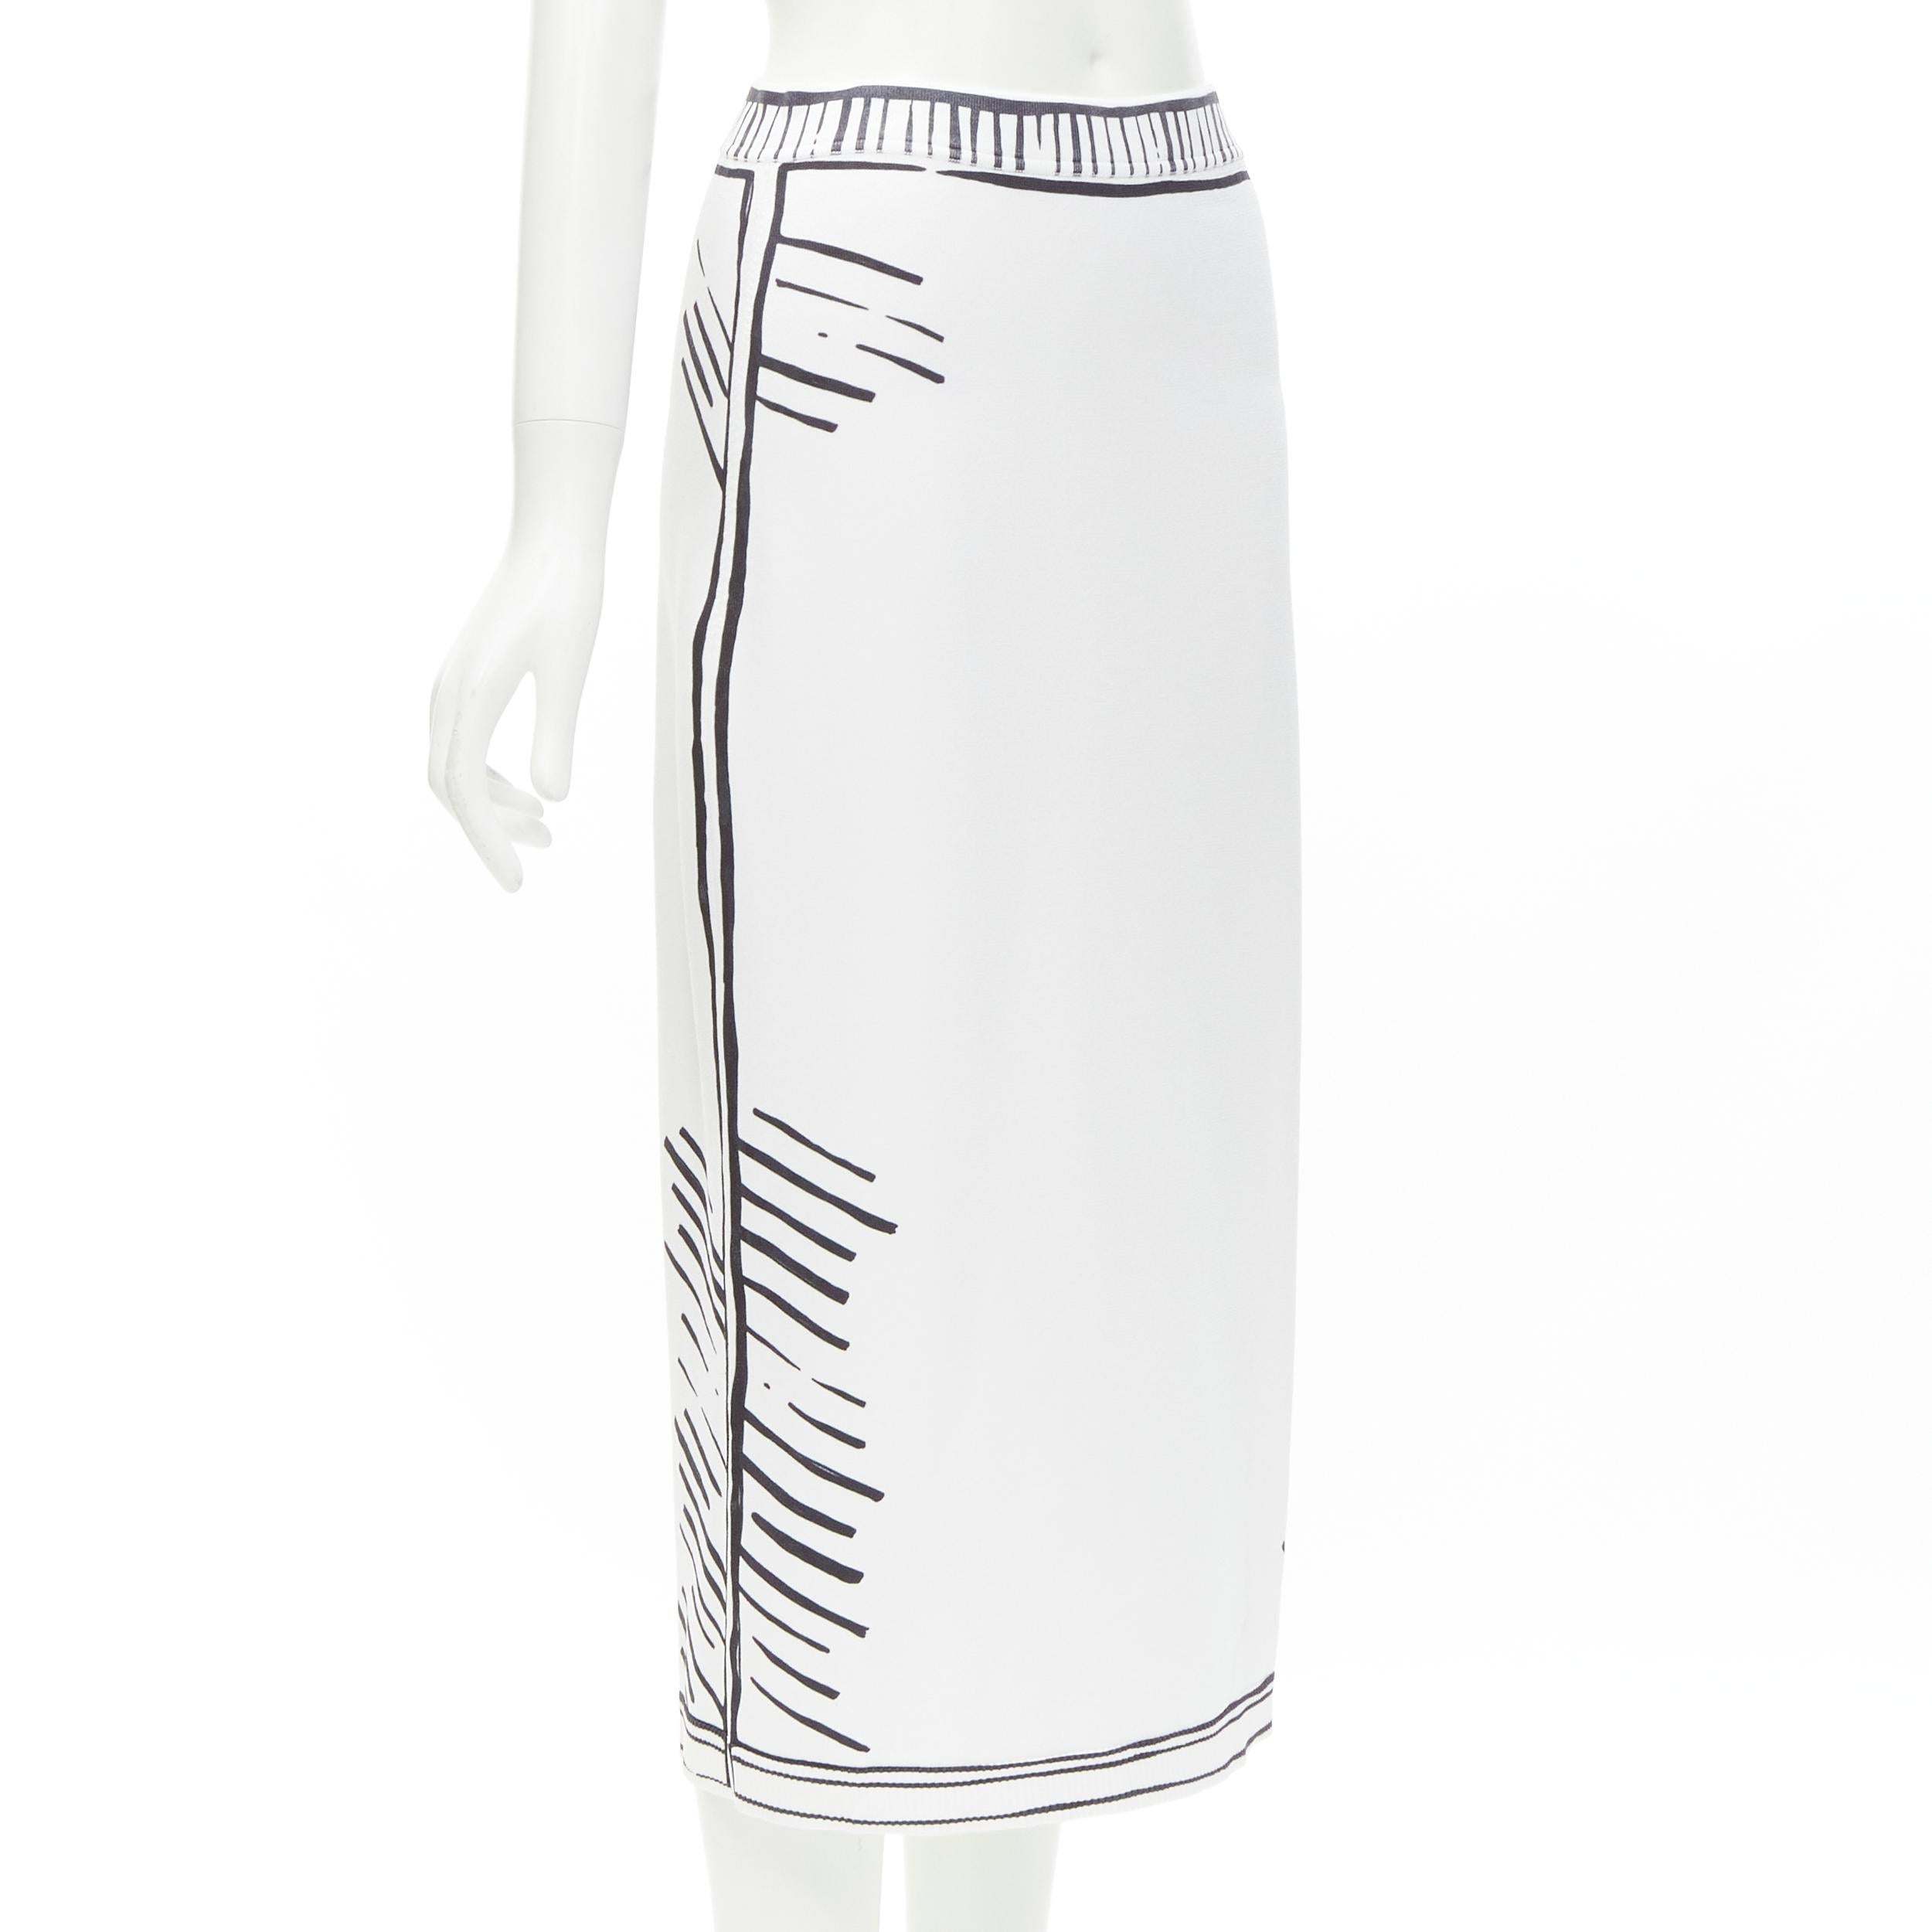 FENDI 2022 Joshua Vides California Sky black white comic marker skirt IT44 M
Brand: Fendi
Collection: California Sky 
Material: Viscose
Color: White
Pattern: Solid
Extra Detail: Stretch fit. Comic illustration inspired print.
Made in: